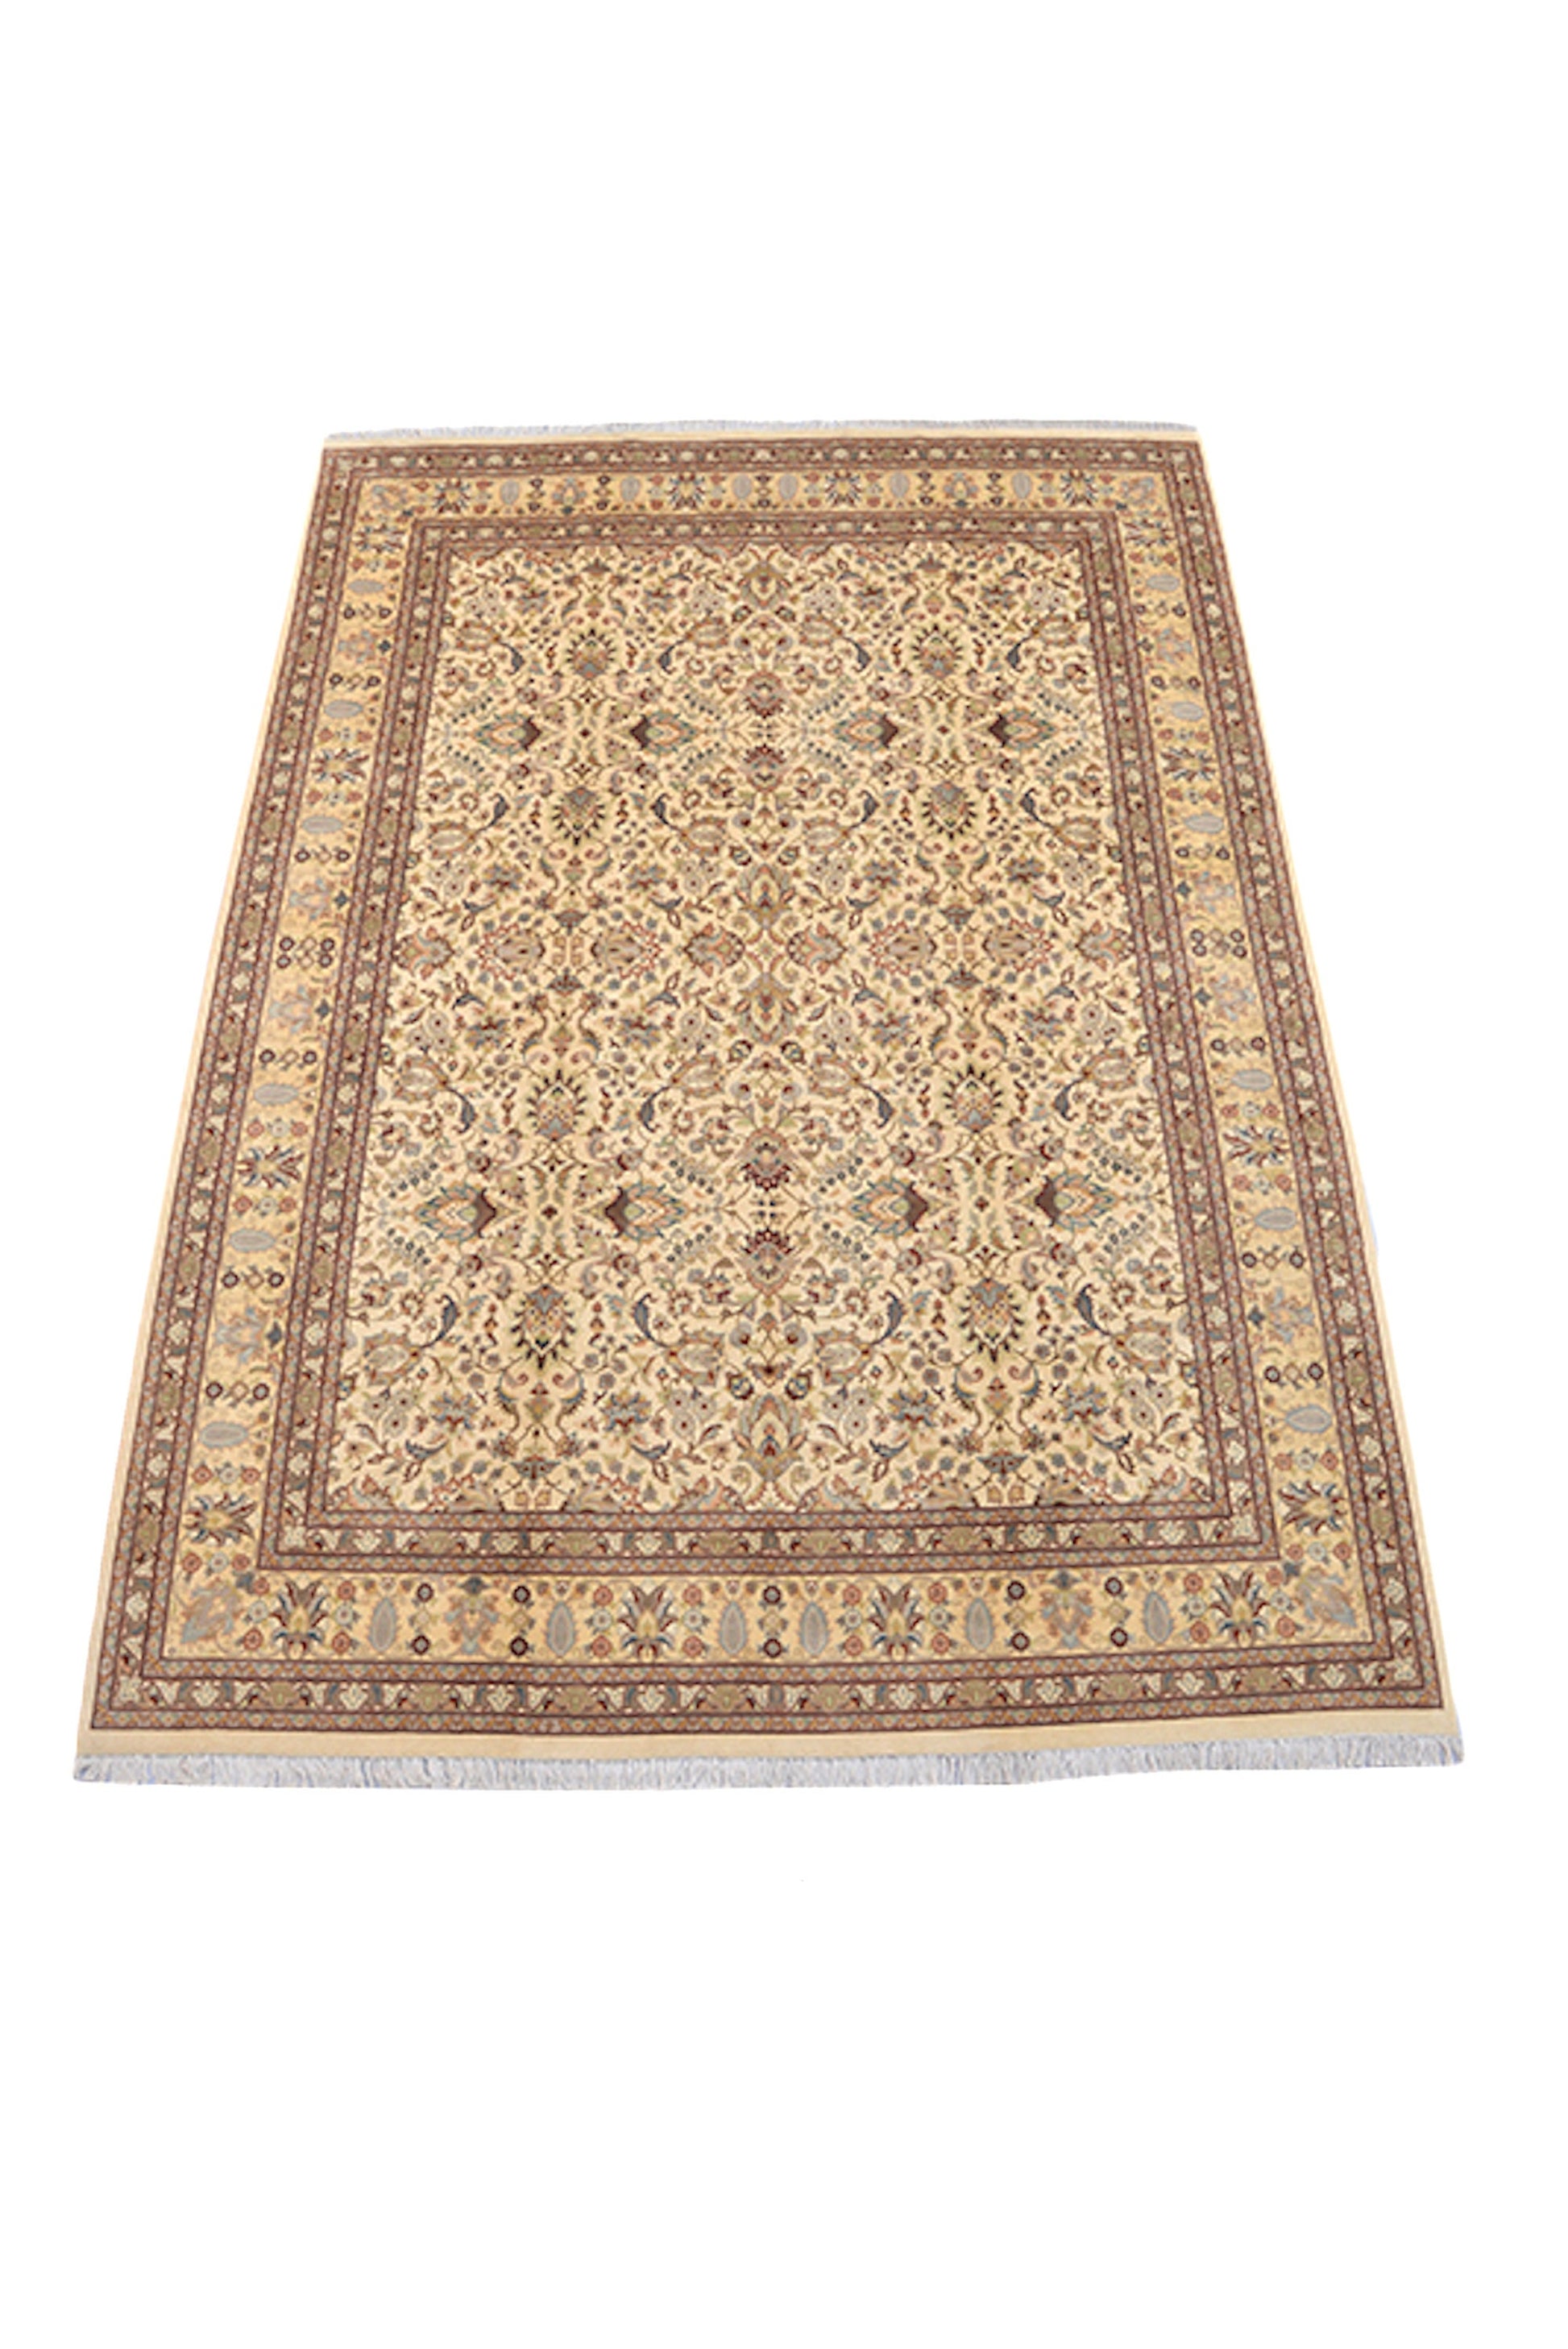 Large Neutral Beige 8 x 11 Handmade Area Rug | Thick Border | Oriental Persian Design | Traditional Style